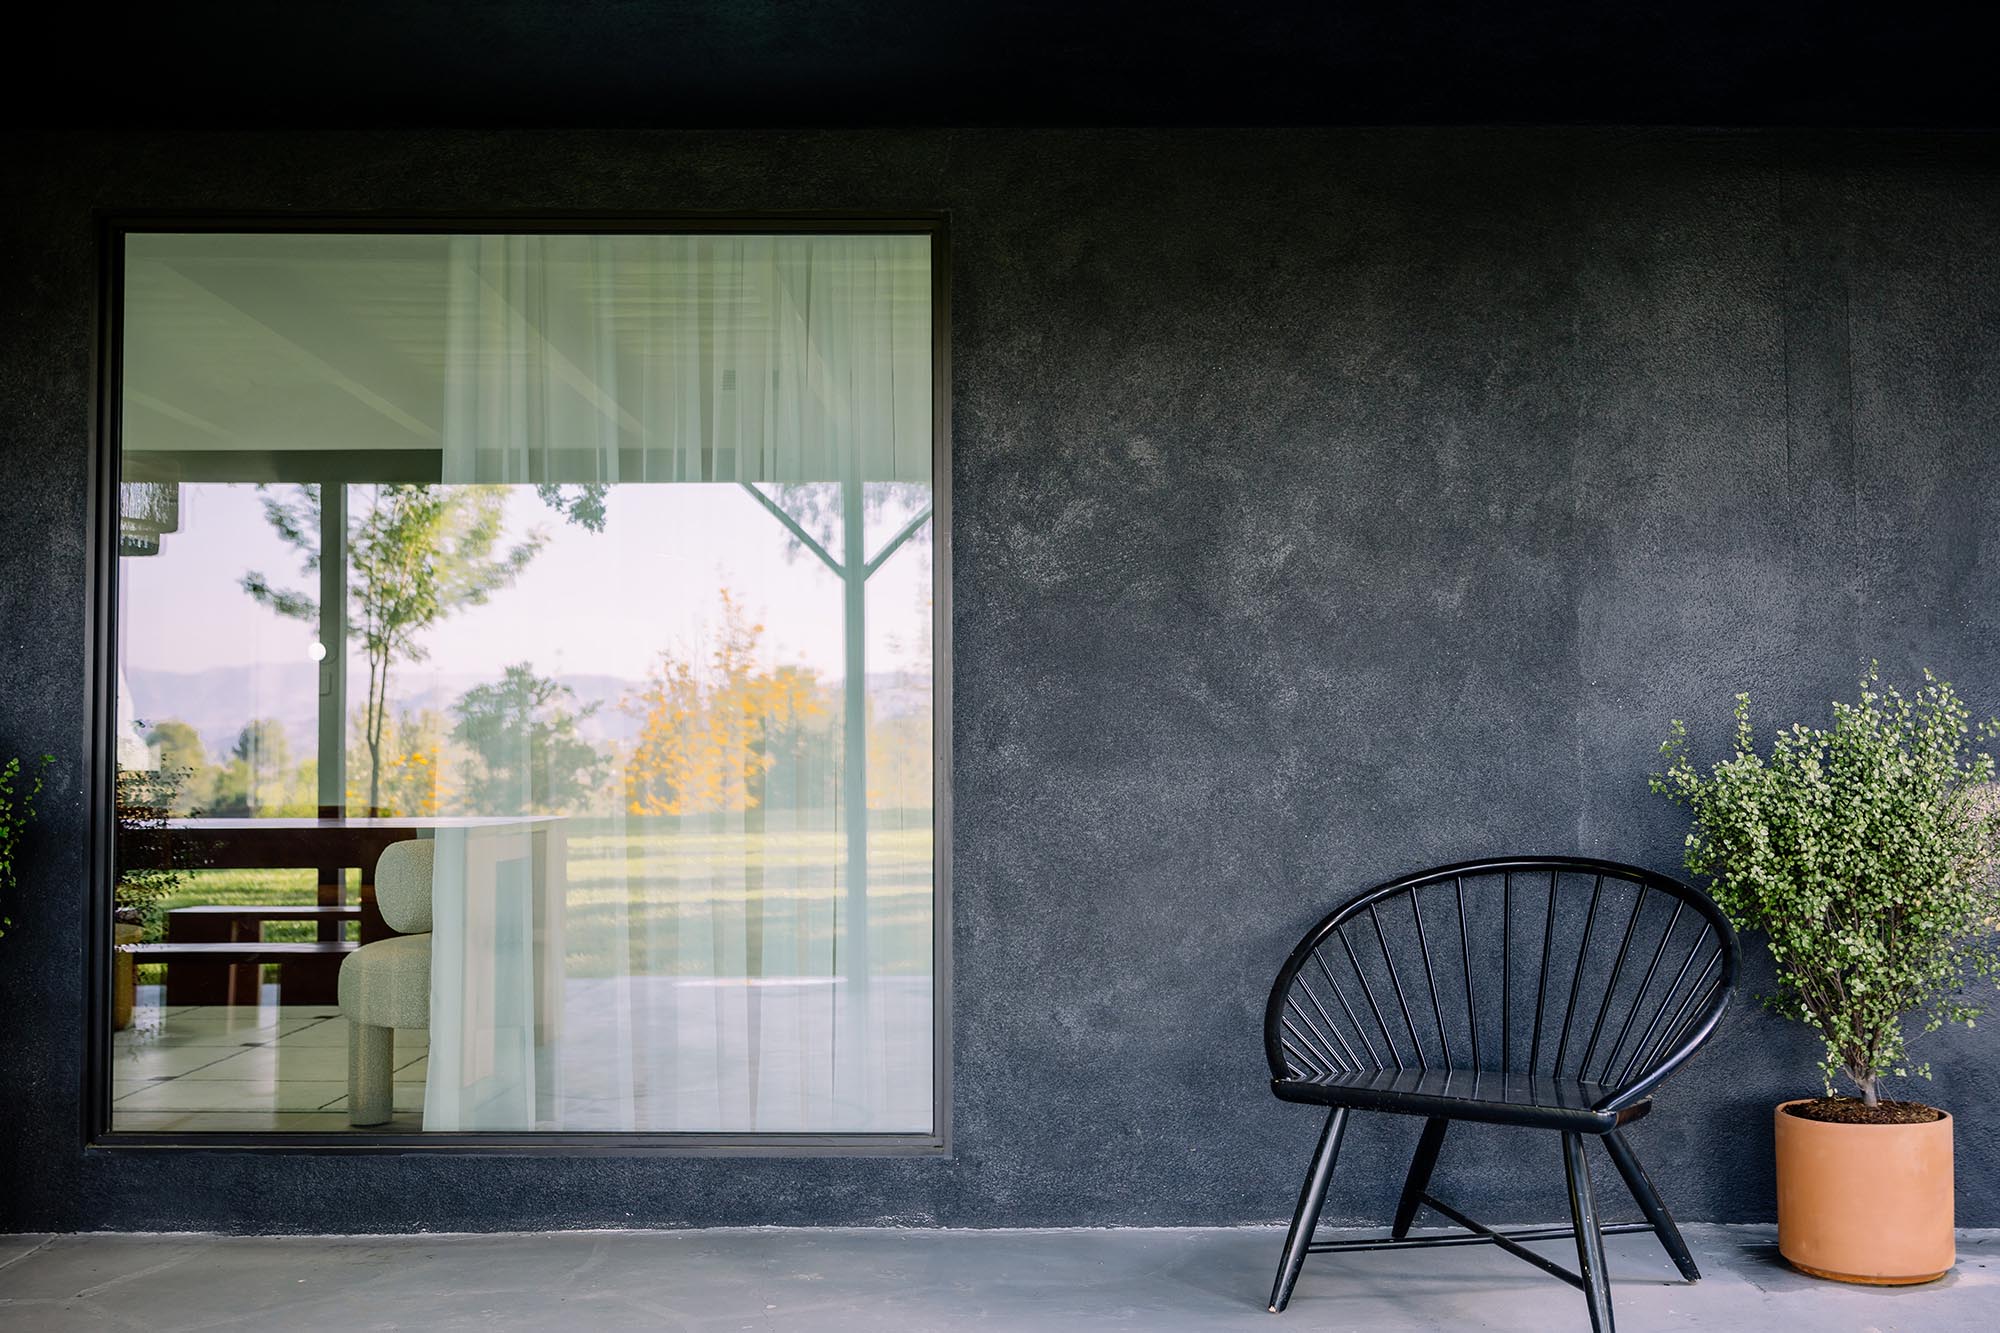 A large fixed window connects this home to the patio and views of the landscape.